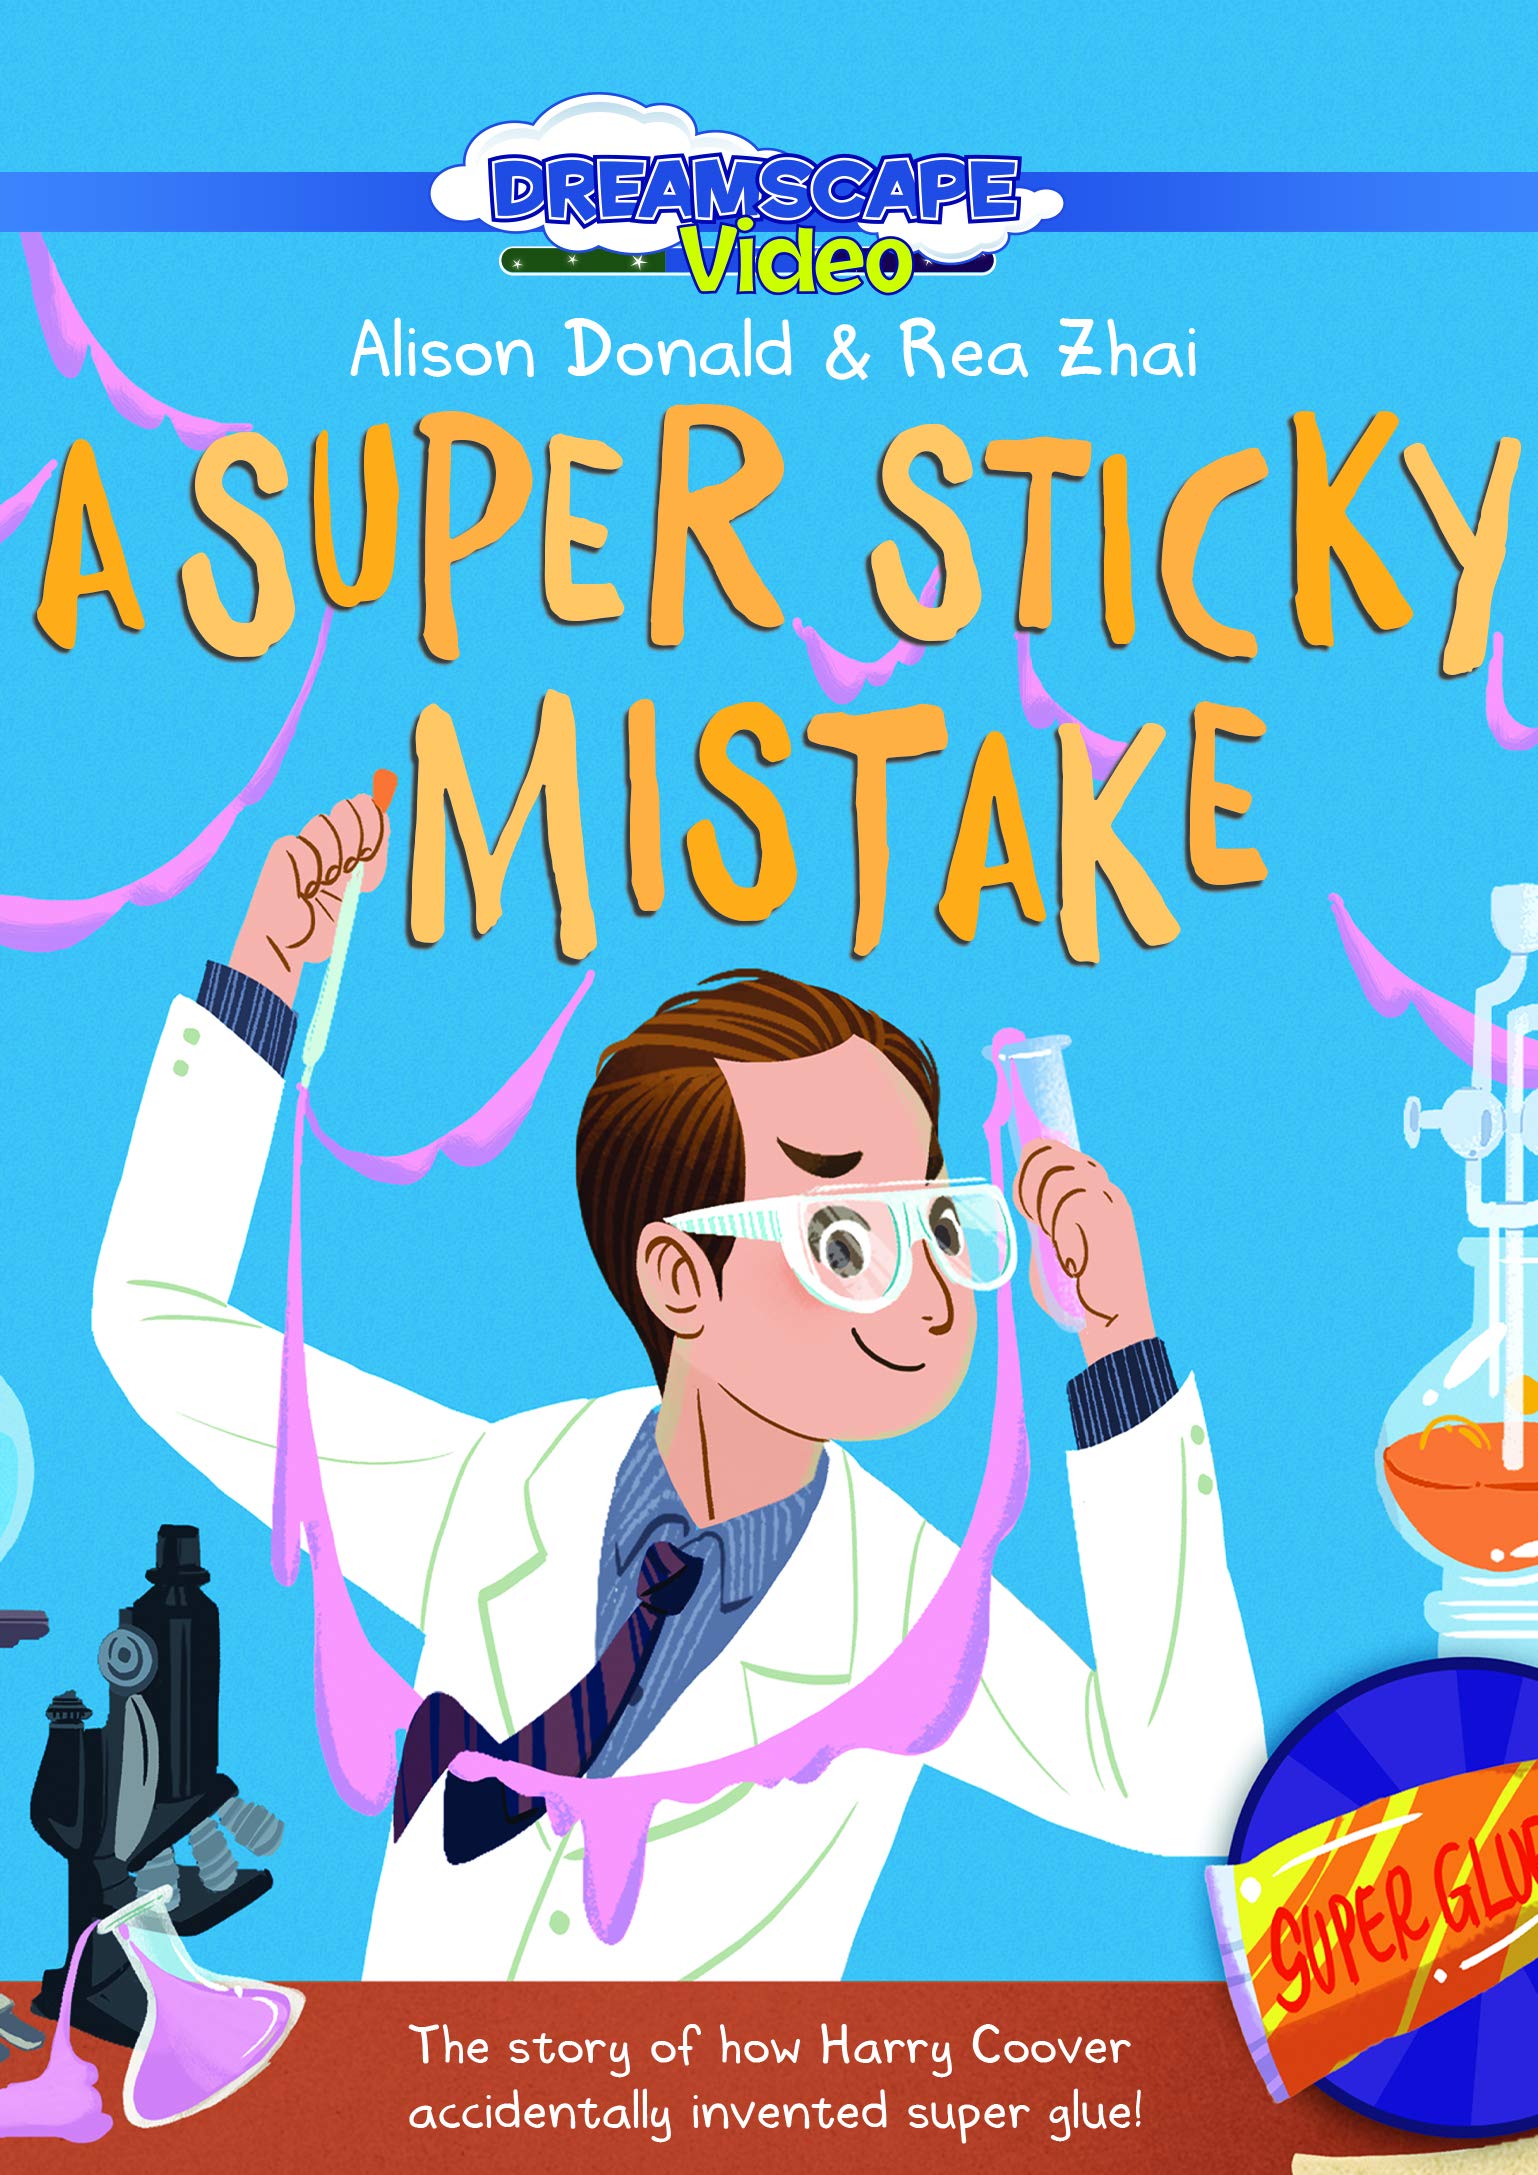 A Super Sticky Mistake: The Story of How Harry Coover Accidentally Invented Super Glue!